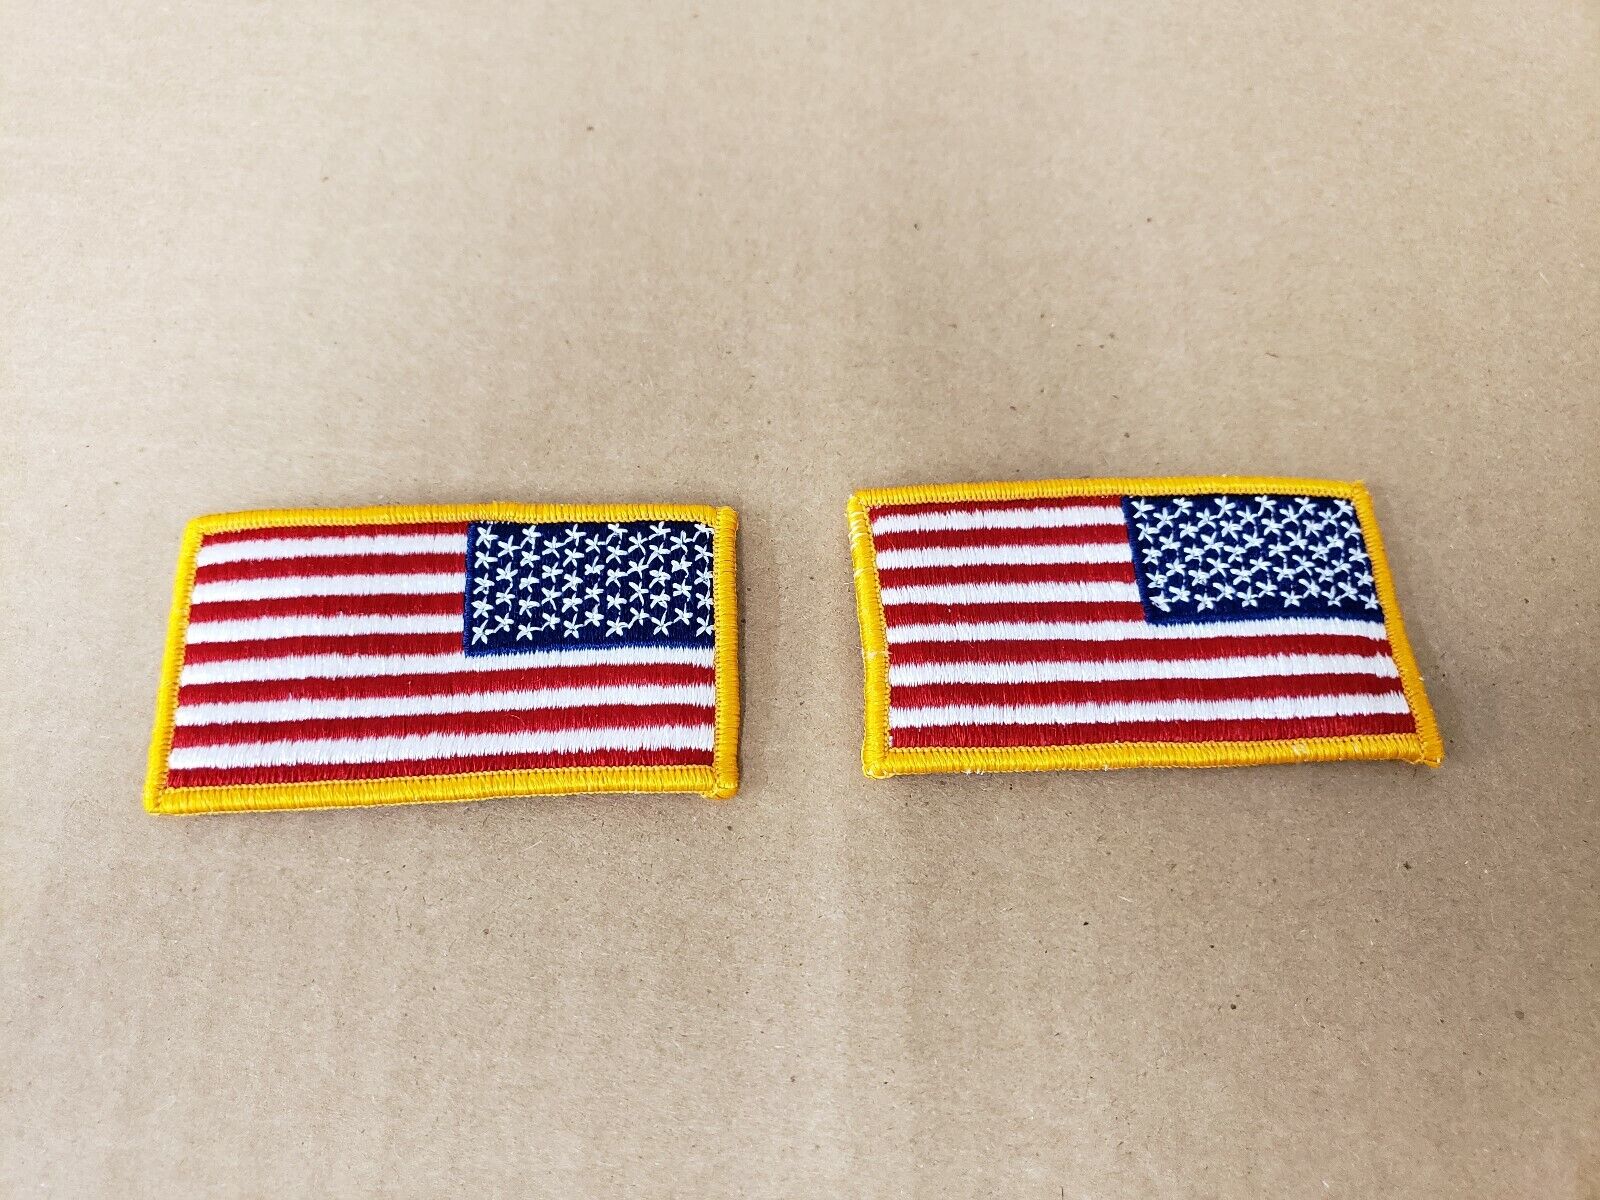 LOT OF 2 US American Flag Reverse Shoulder Patch Orange Border. MADE IN THE USA